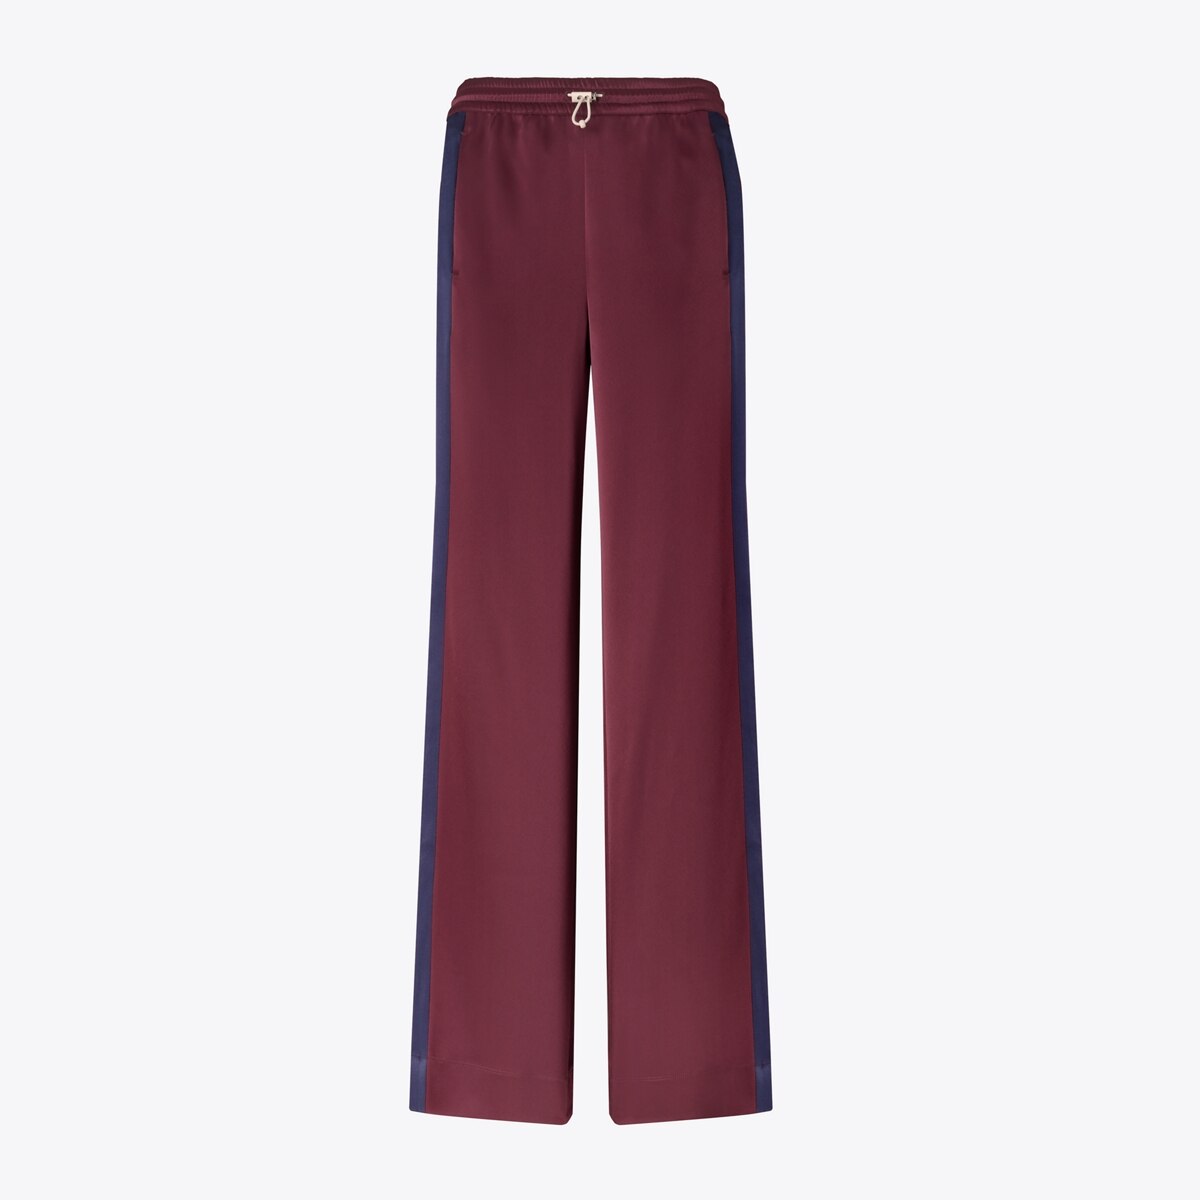 https://s7.toryburch.com/is/image/ToryBurch/style/satin-track-pant-front.TB_73469_509_SLFRO.pdp-1200x1200.jpg